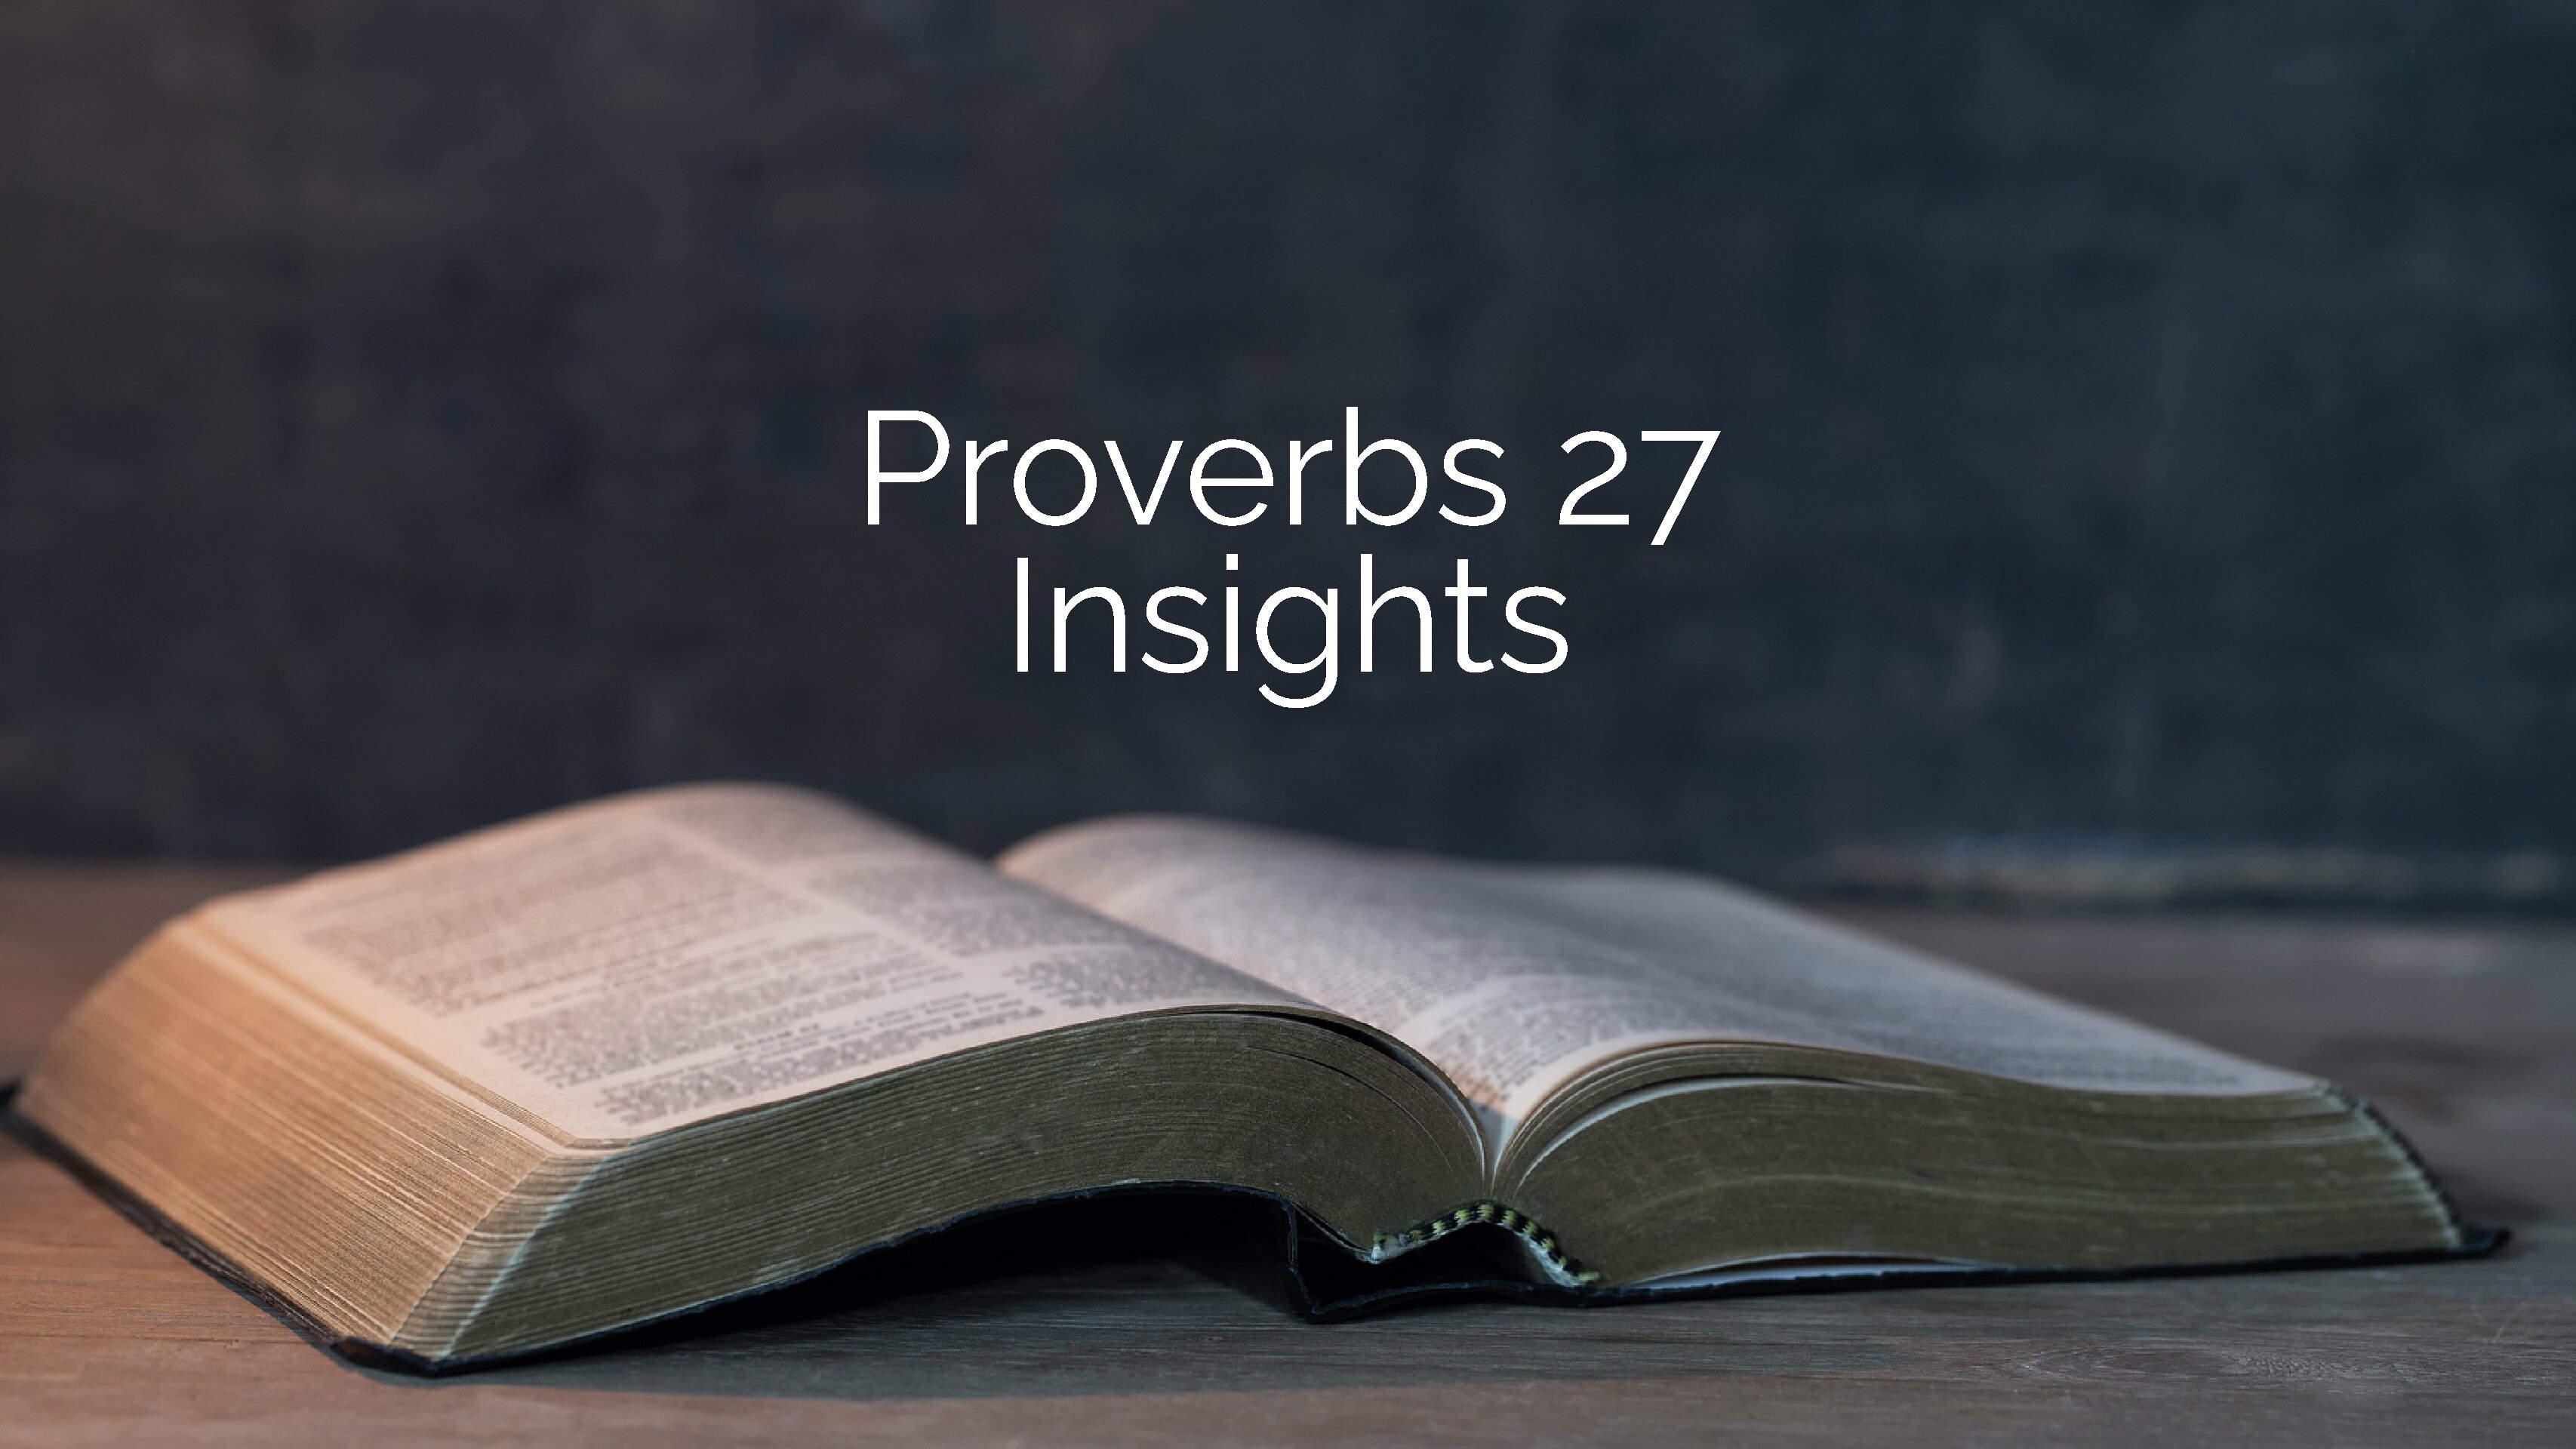 Proverbs 27 Insights